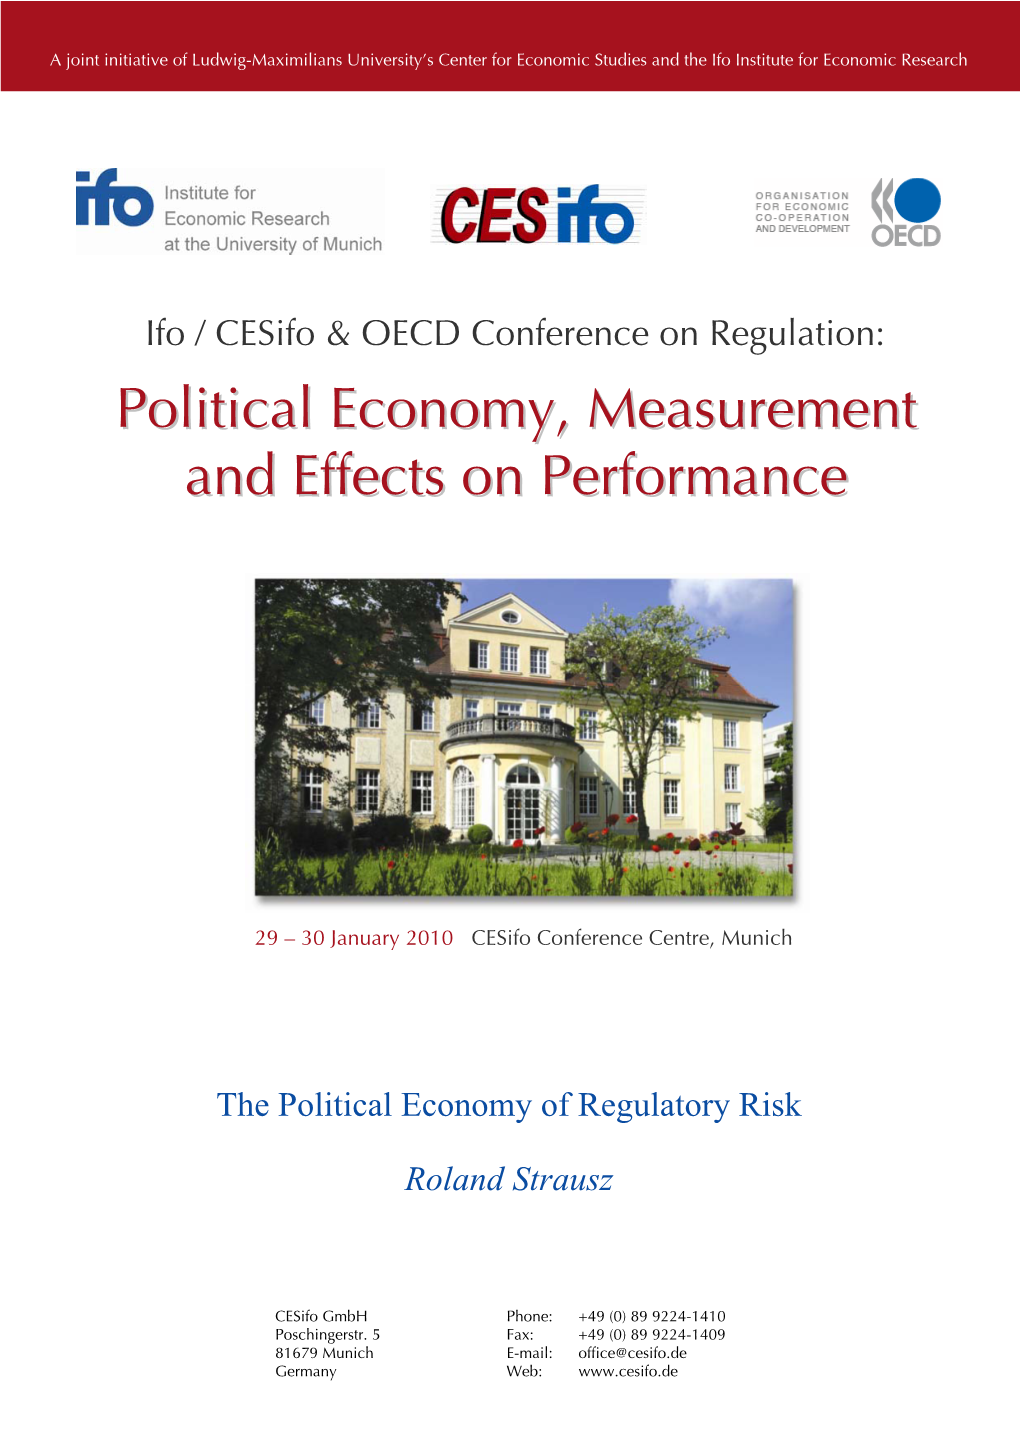 Political Economy, Measurement and Effects on Performance